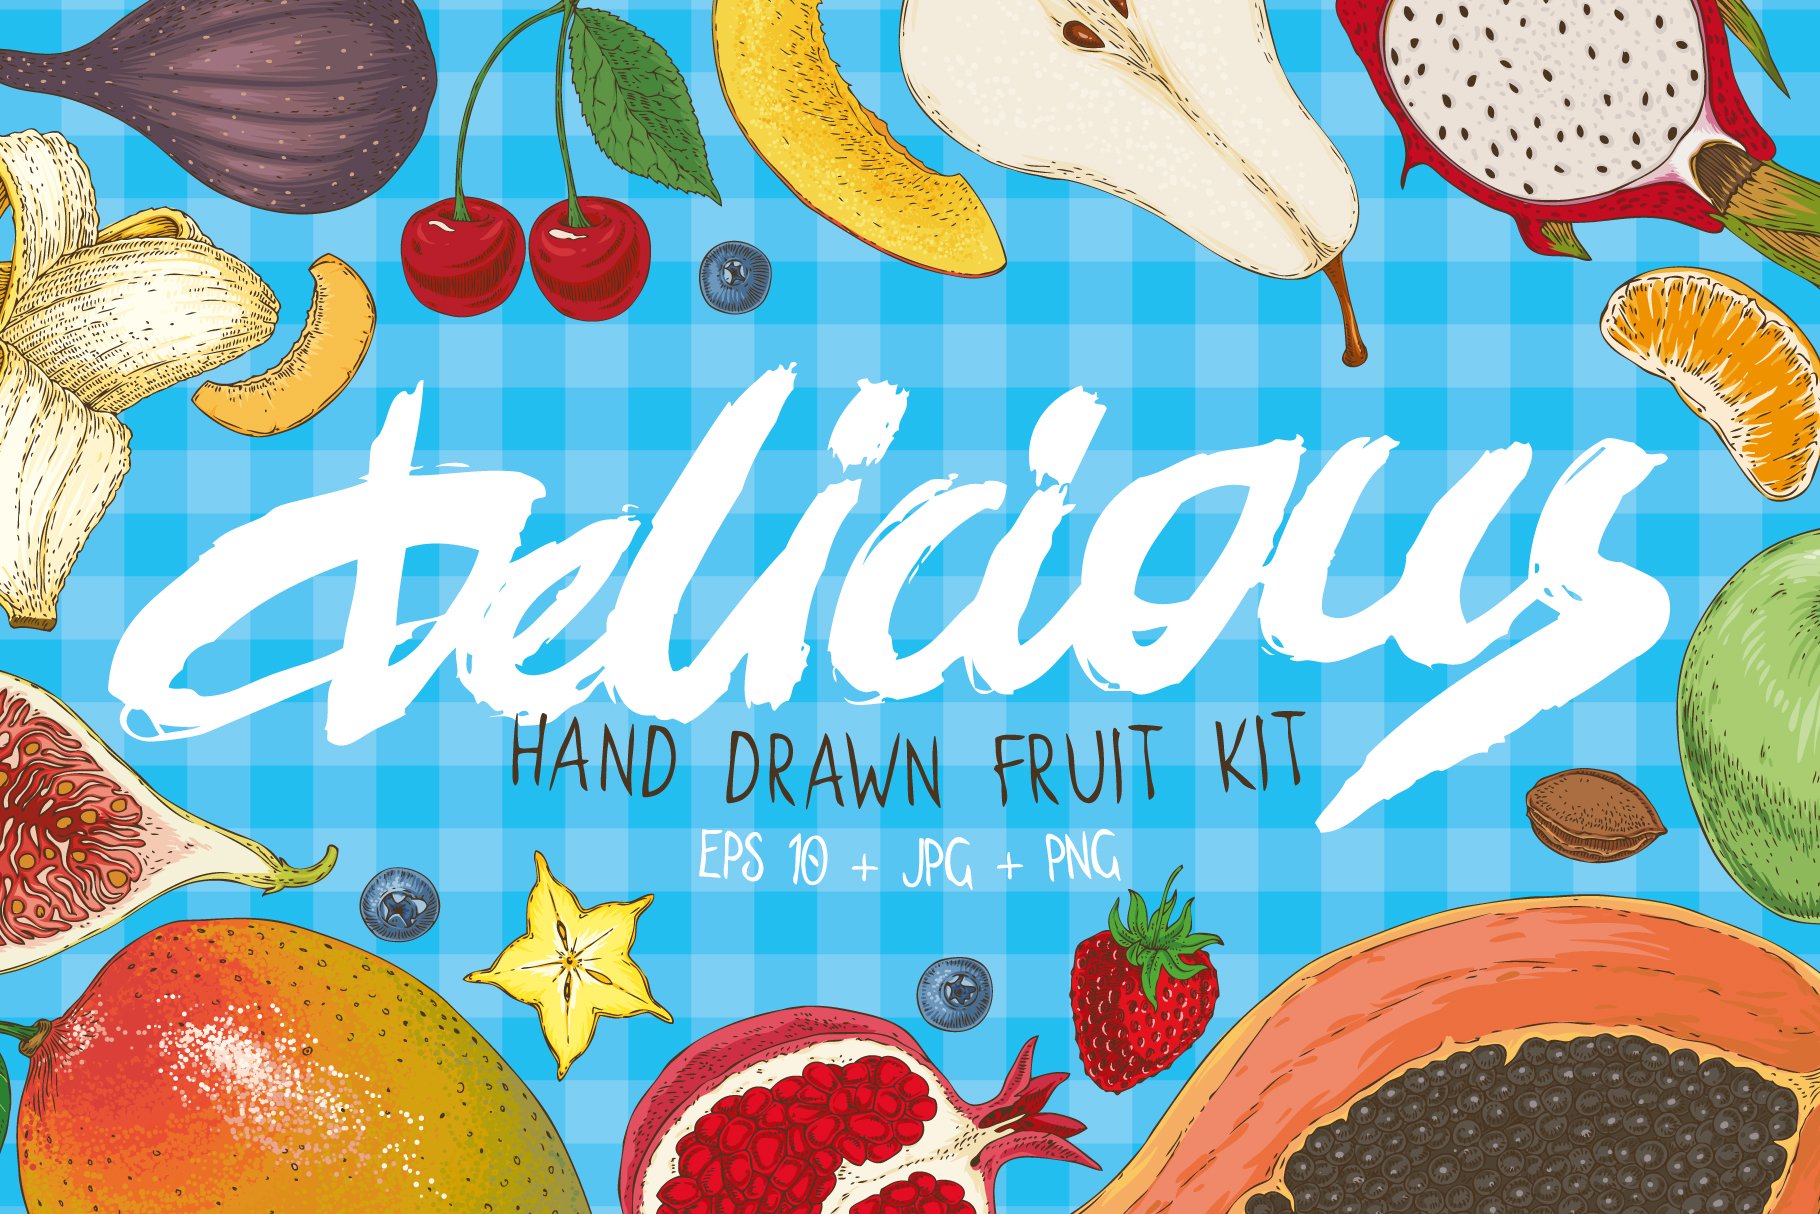 Delicious Hand Drawn Fruit Kit cover image.